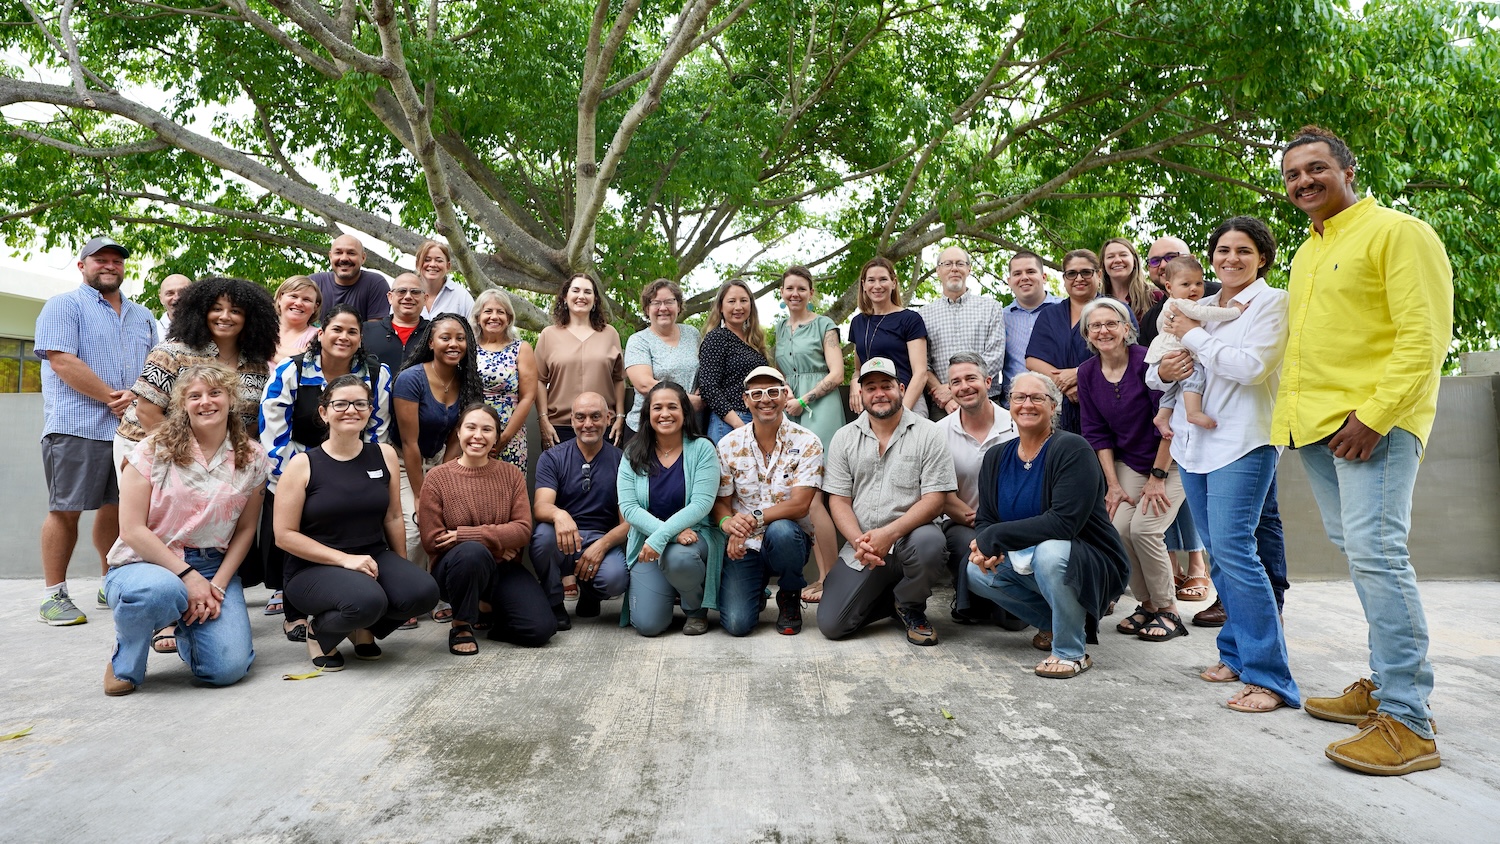 Group photo of the Caribbean Community of Practice researchers, practitioners, and professionals.